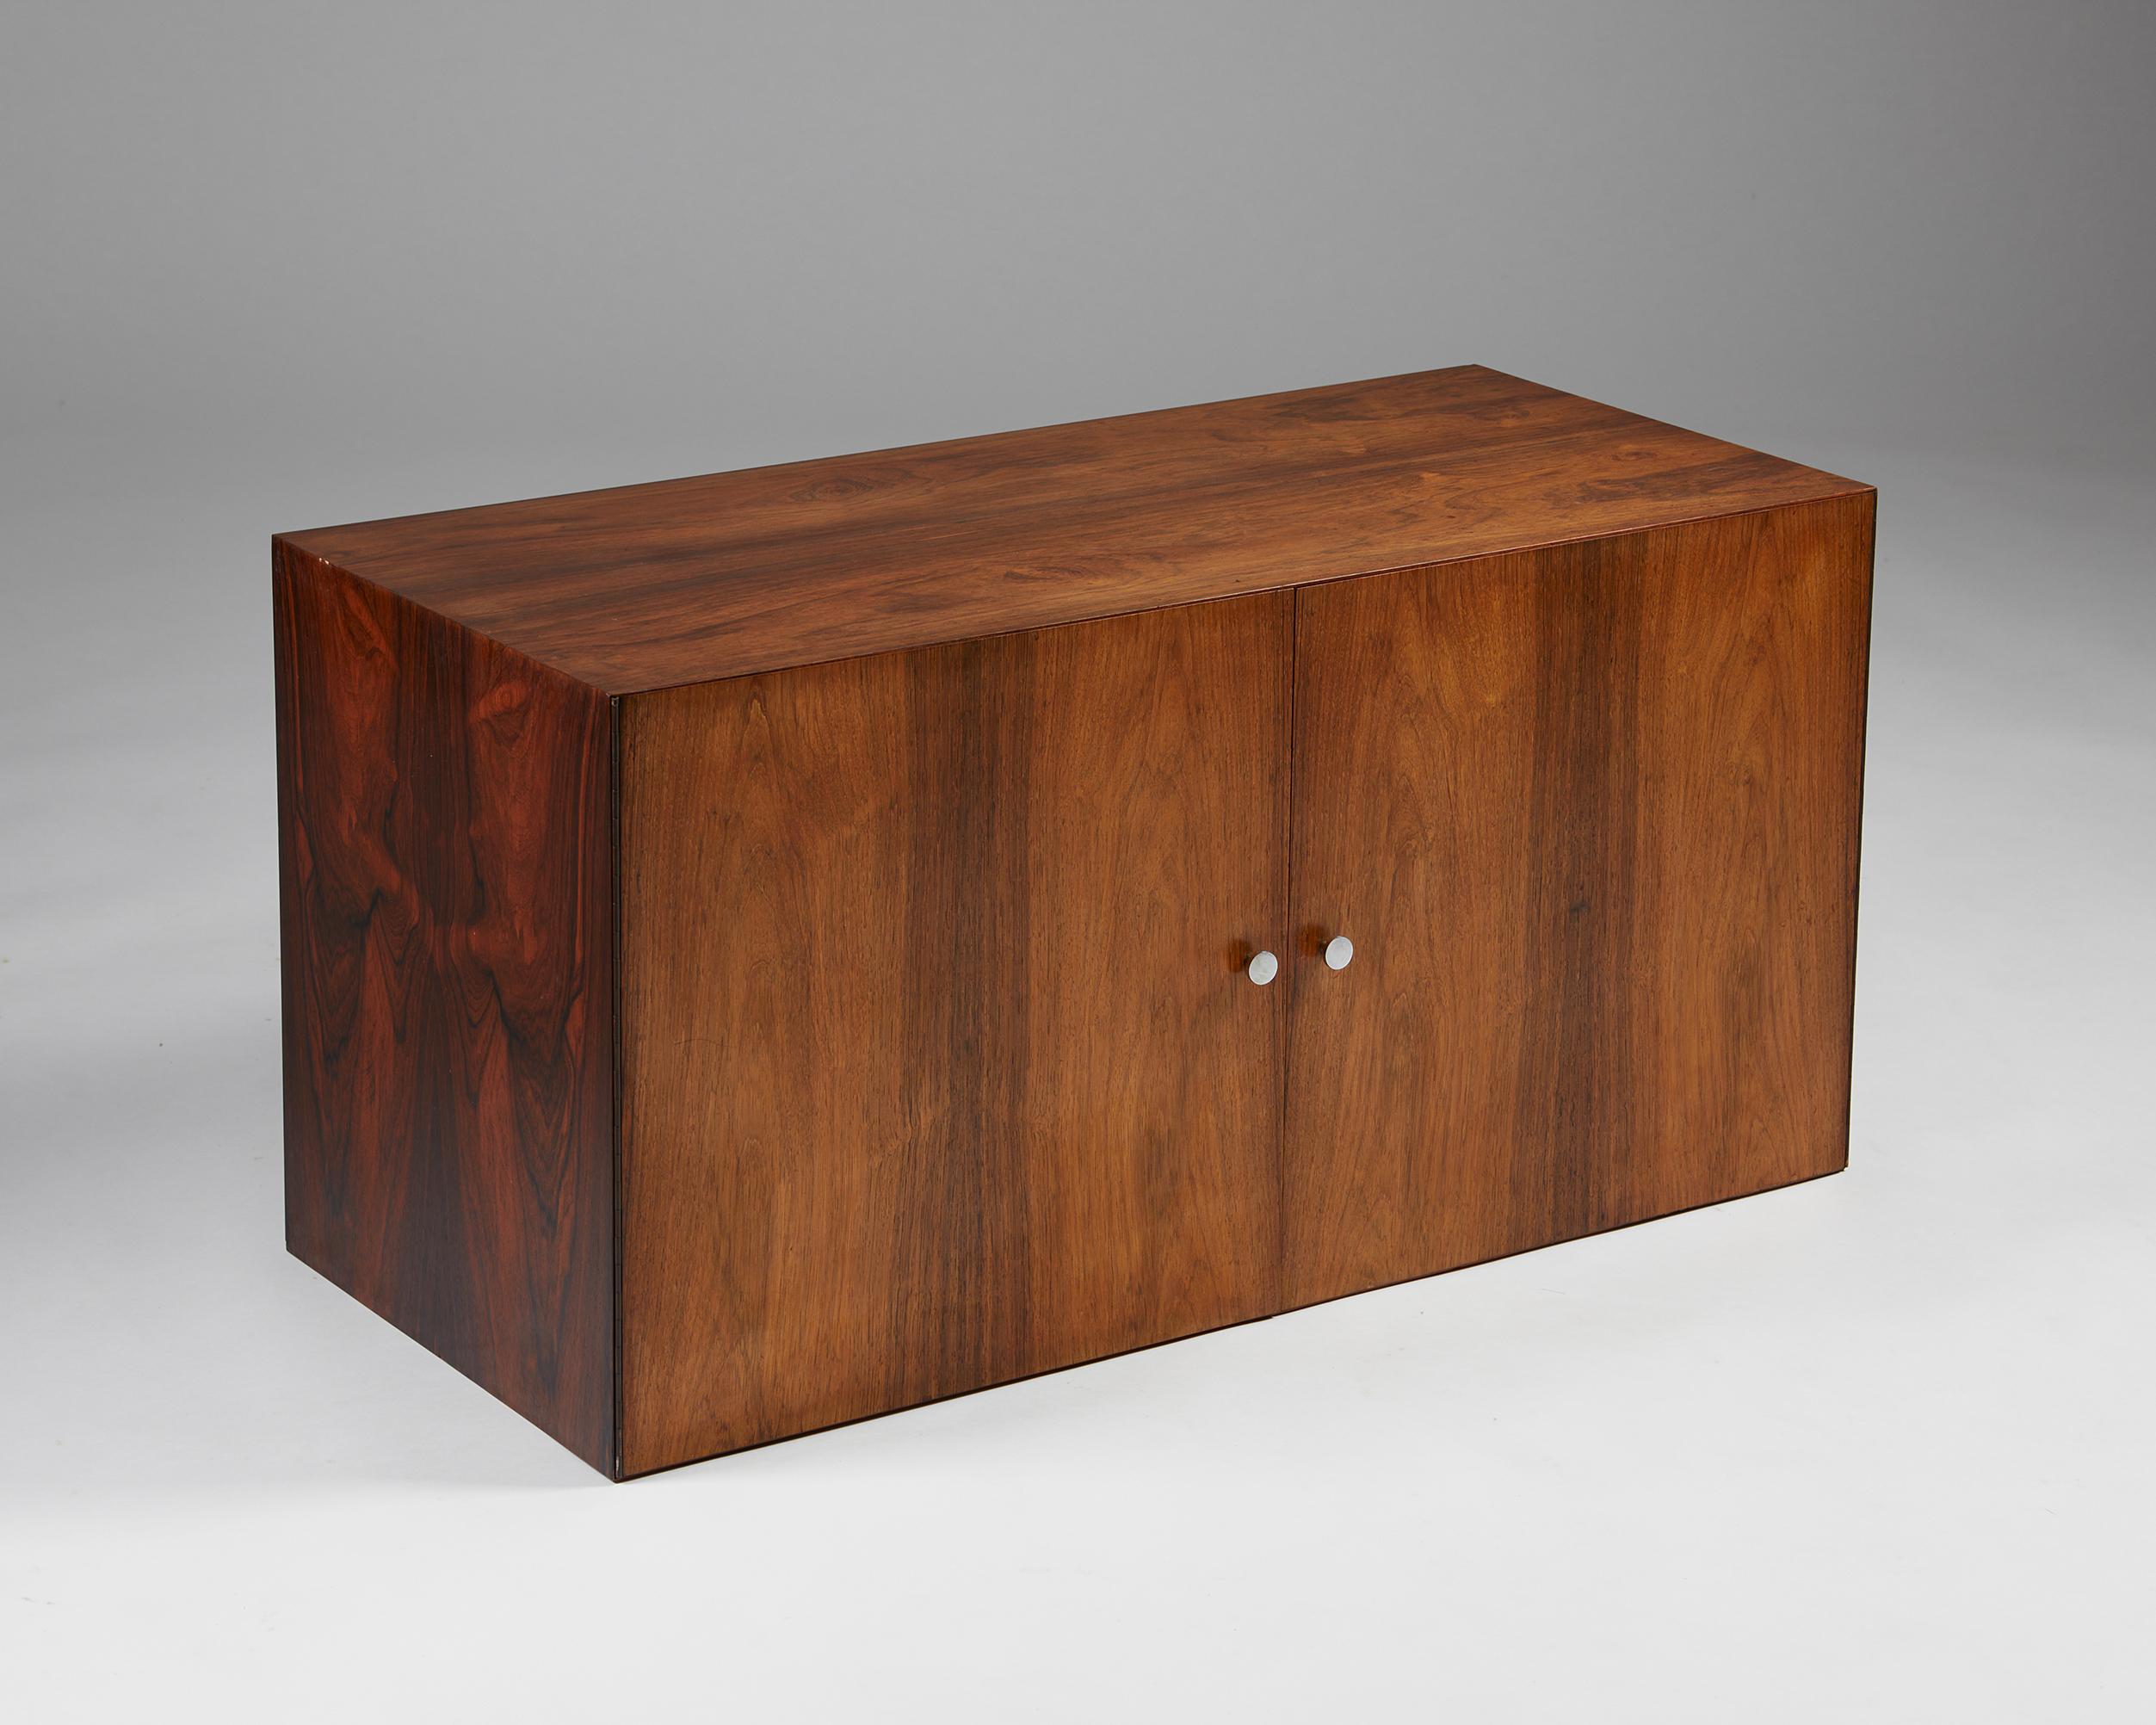 20th Century Set of Three Wall Hung Sideboards Designed by Poul Nørreklit for Sigurd Hansen